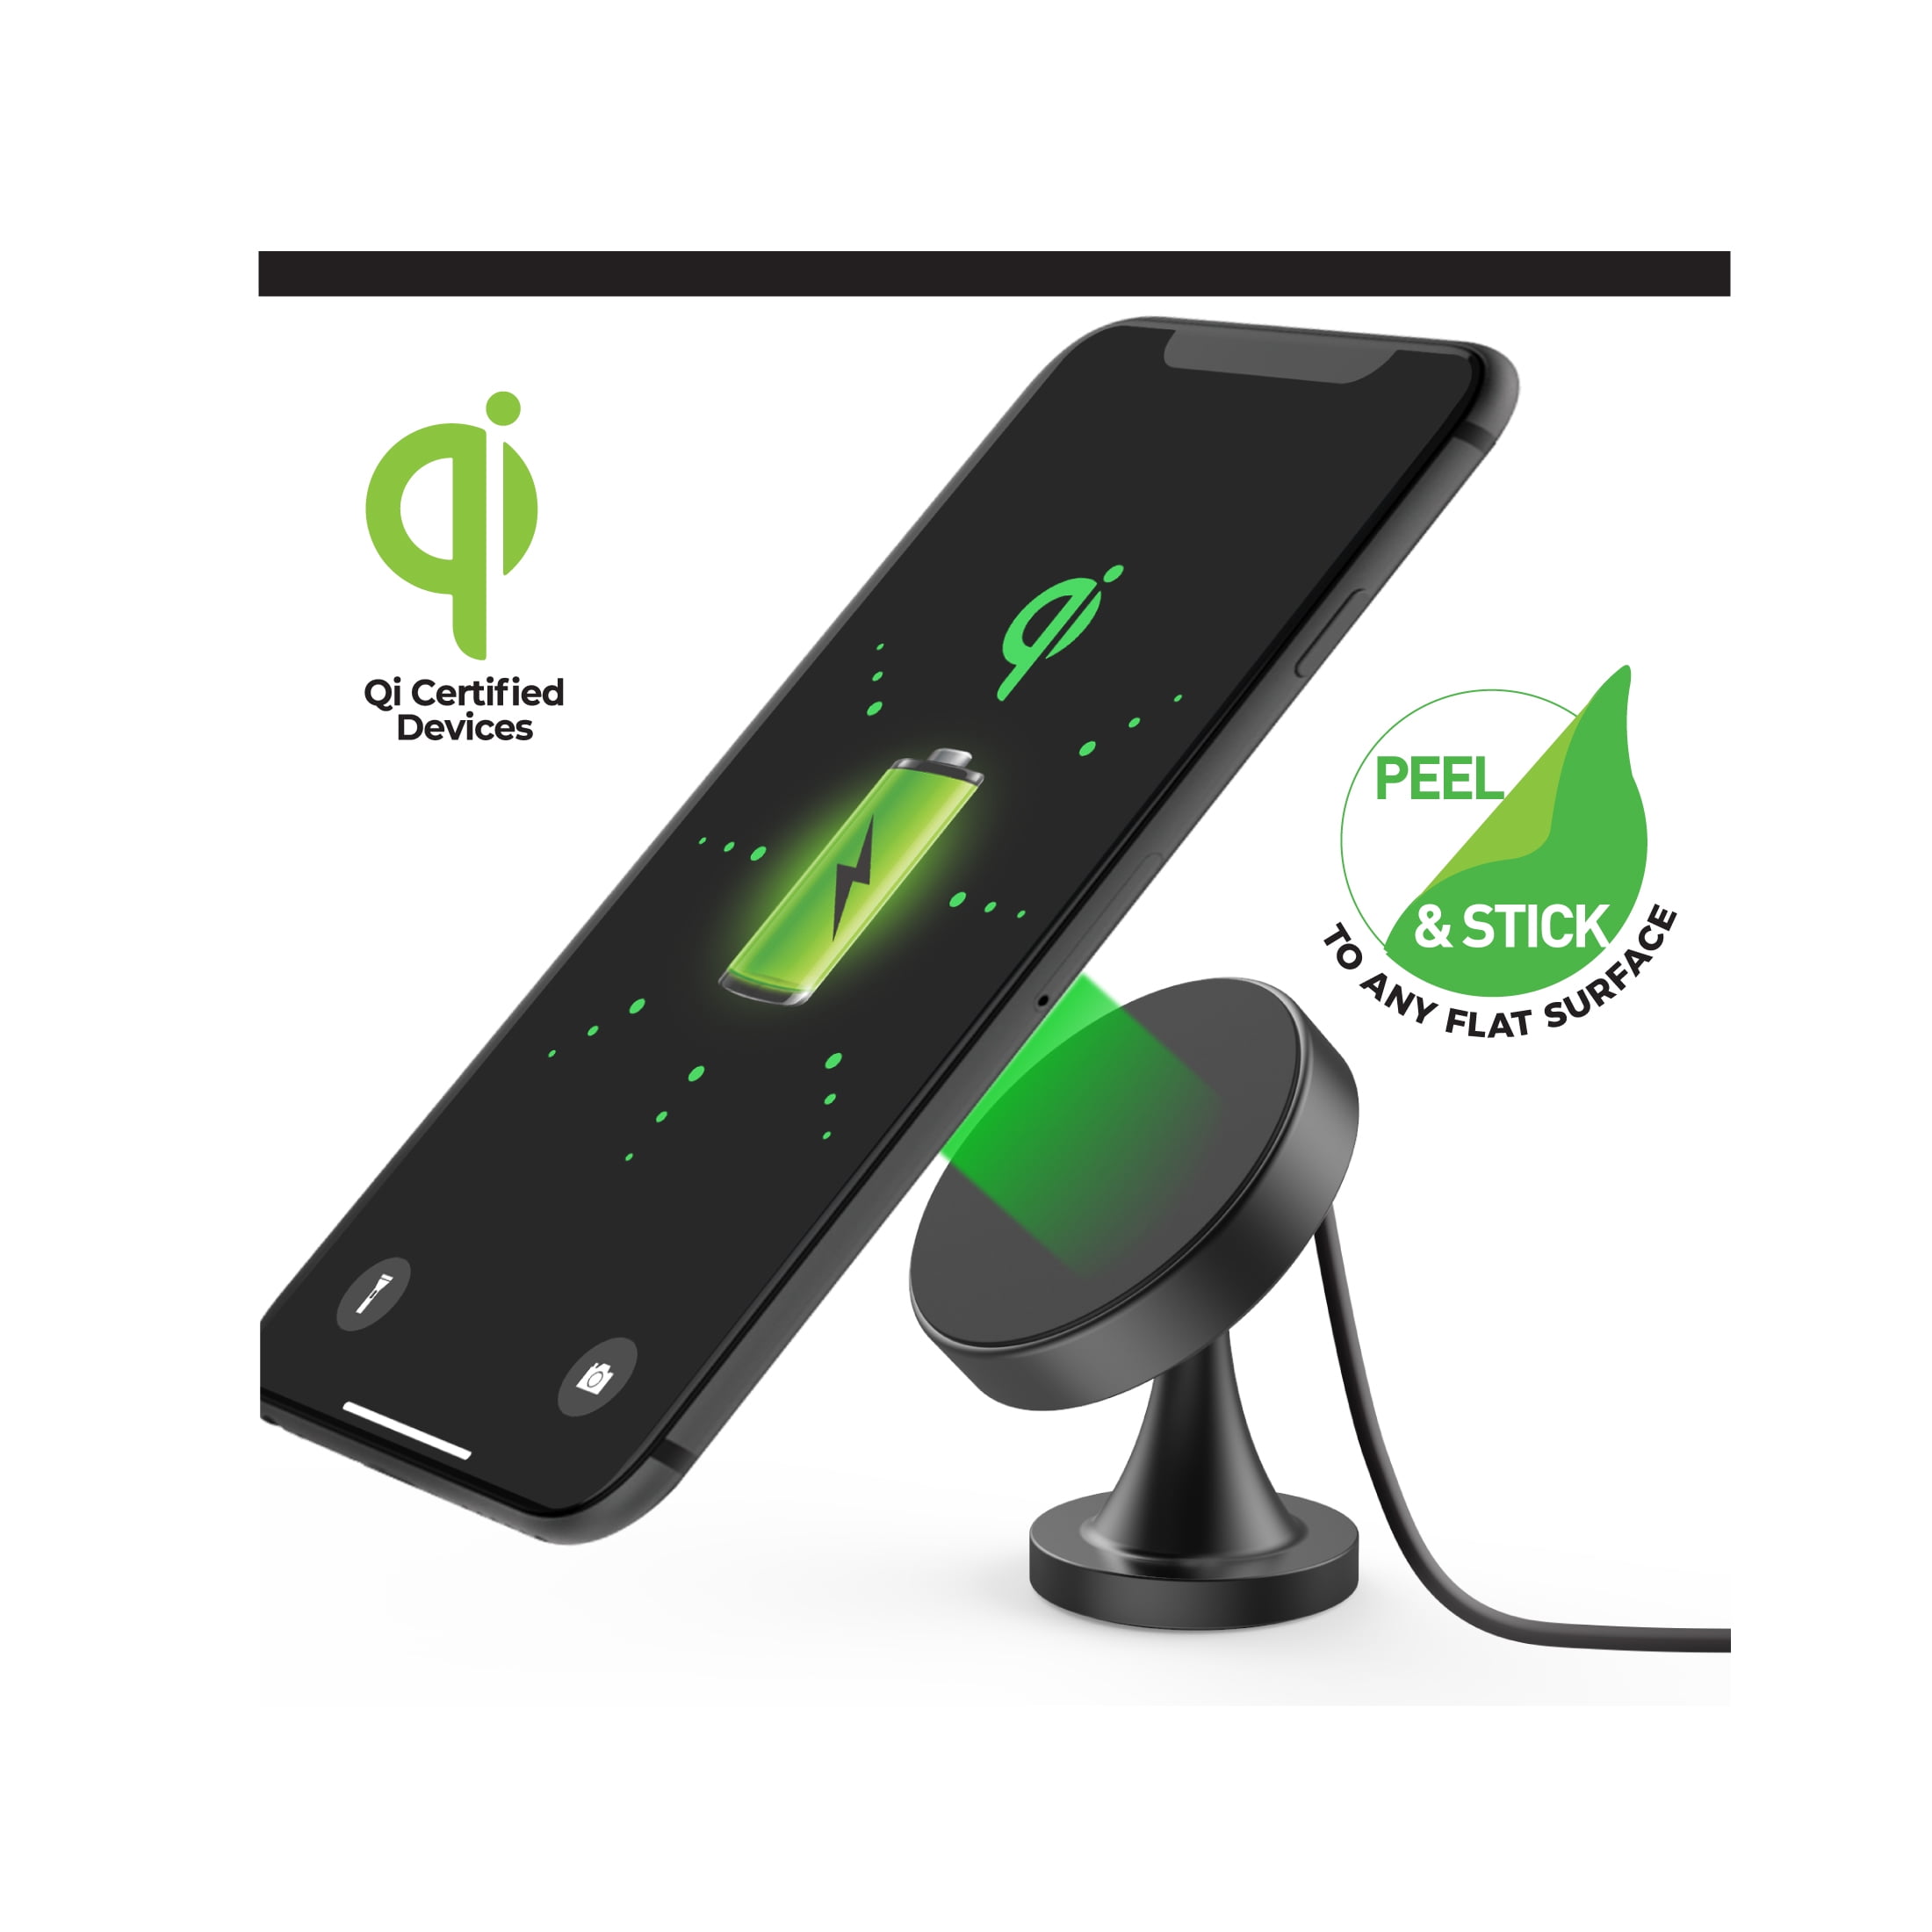 Premier Wireless Charger Car Dashboard Phone Mount with Magnetic Nano Suction For iPhone, Samsung